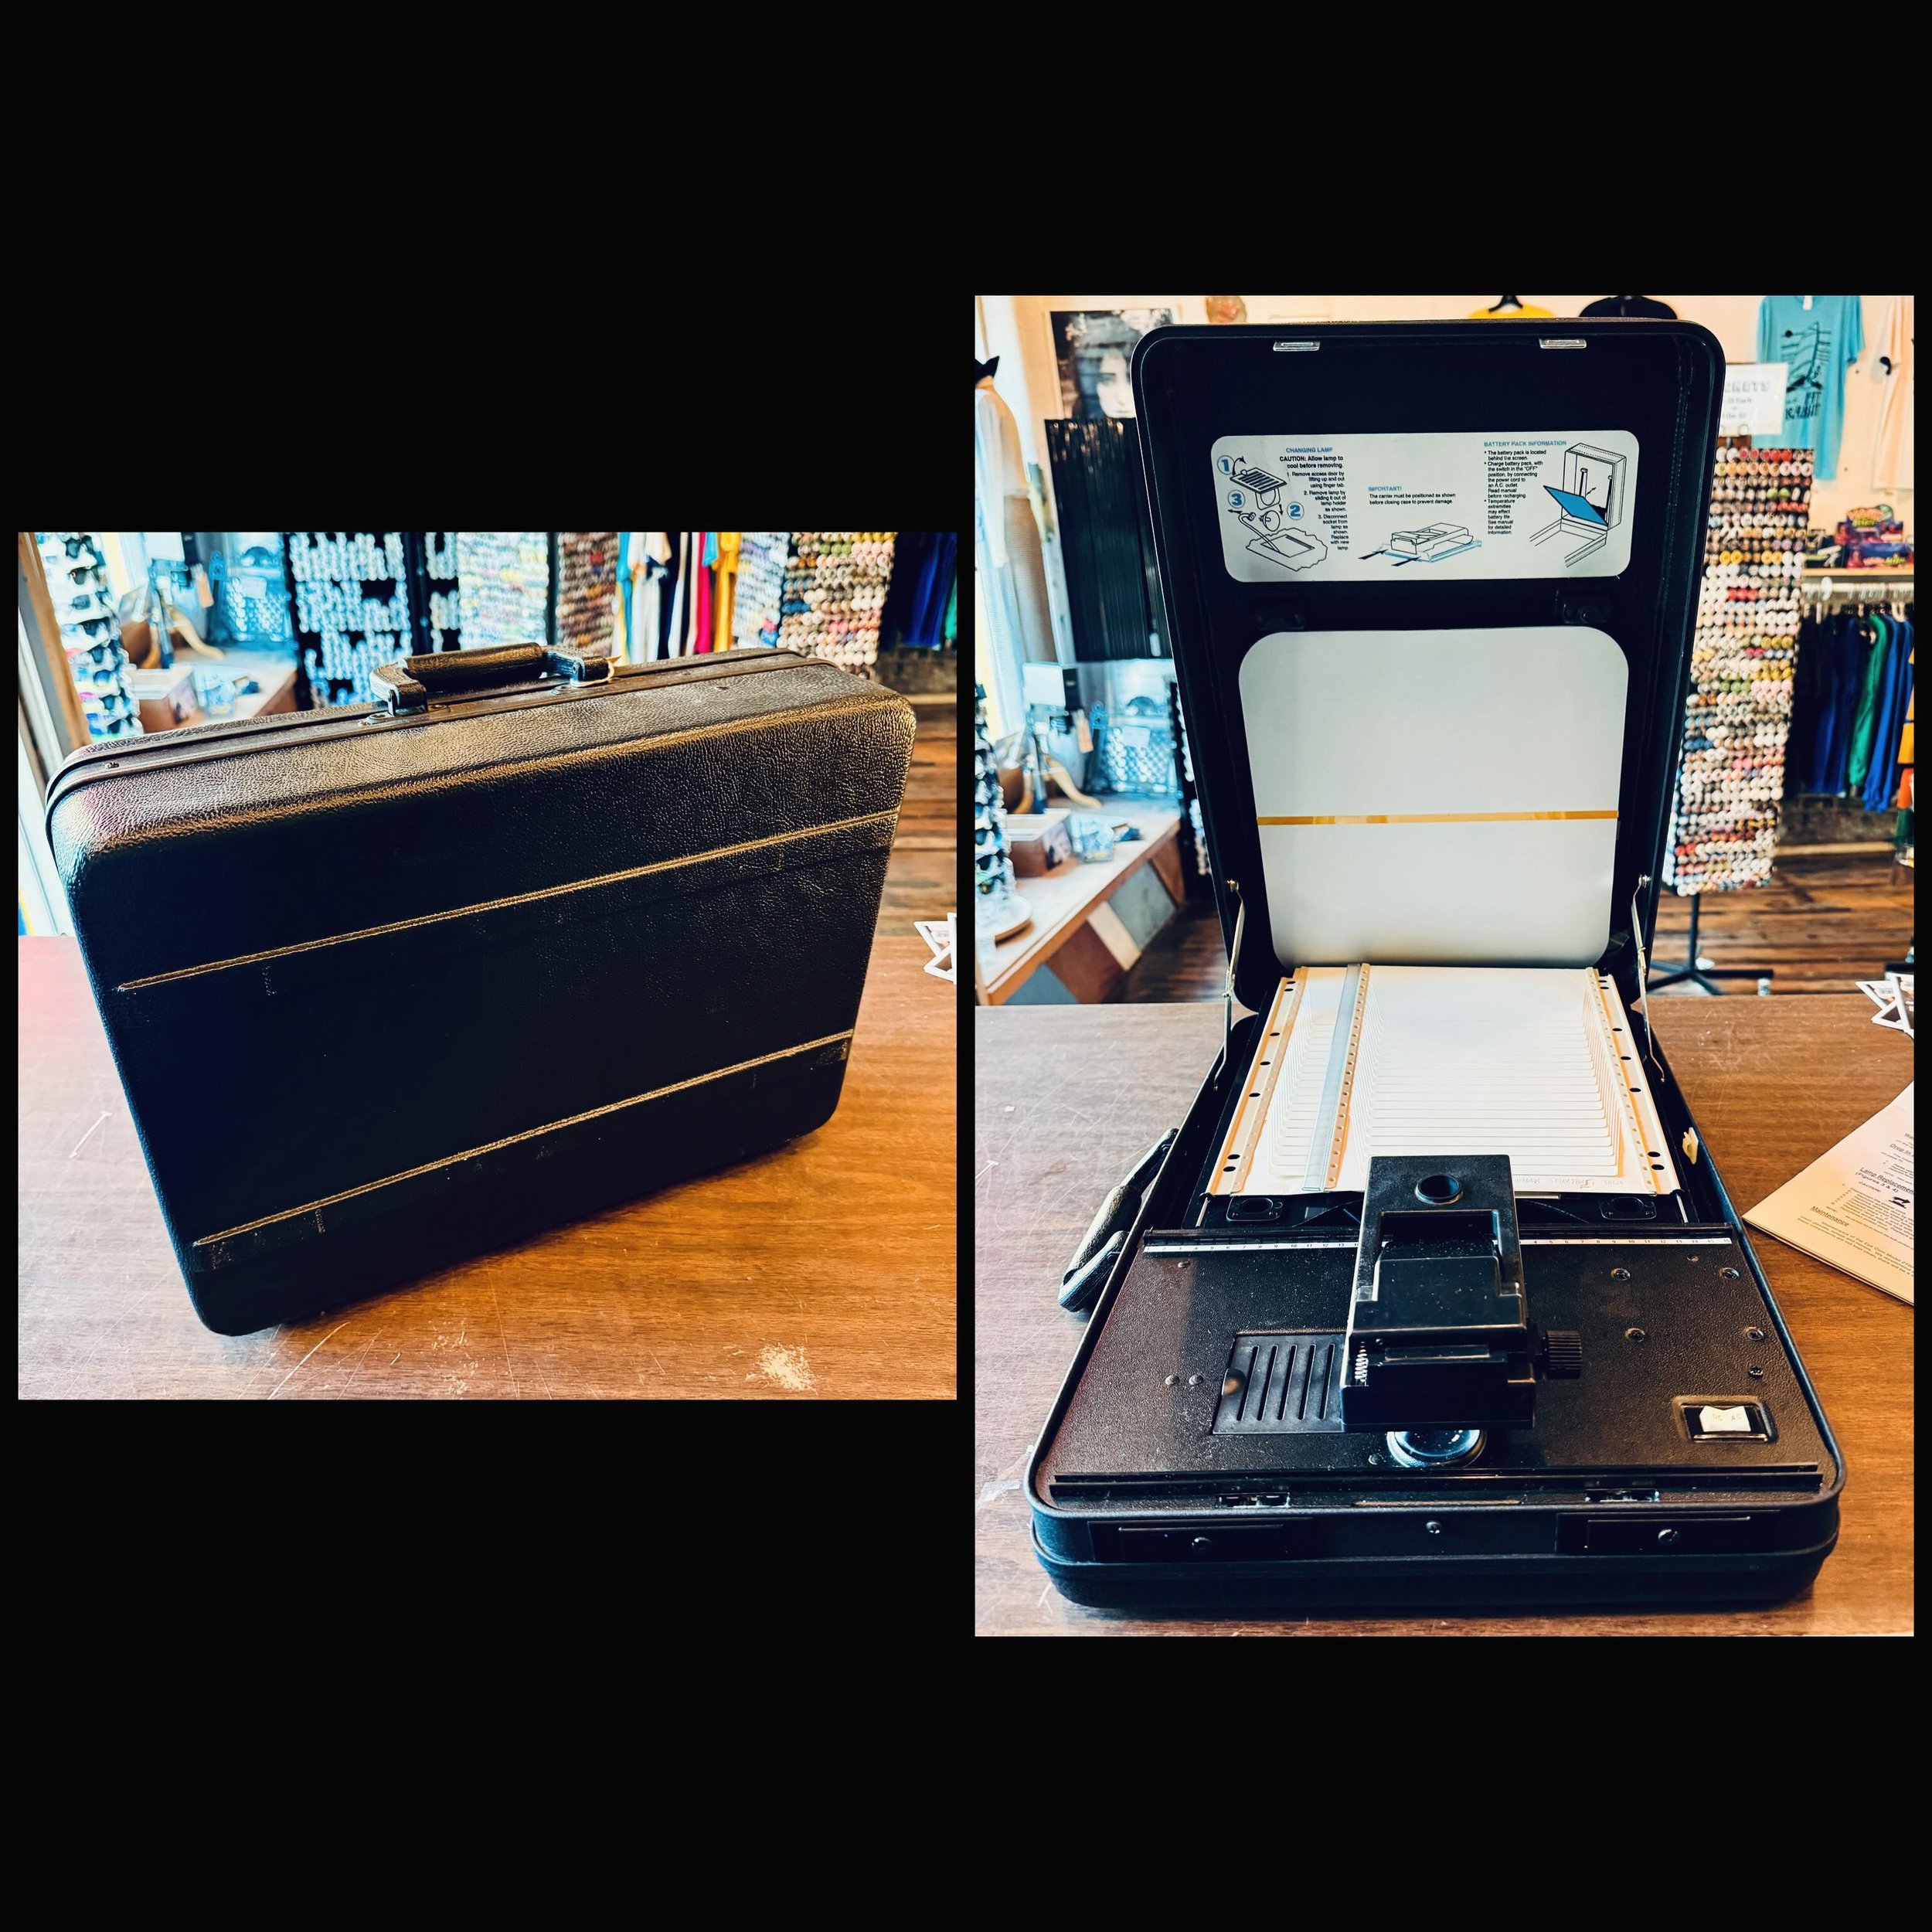 Attention spies: EYECOM 👁️2100 suitcase microfiche projector! Works and very clean! SO MANY SECRETS. $35
#fatrabbitky #eyecom #microfiche